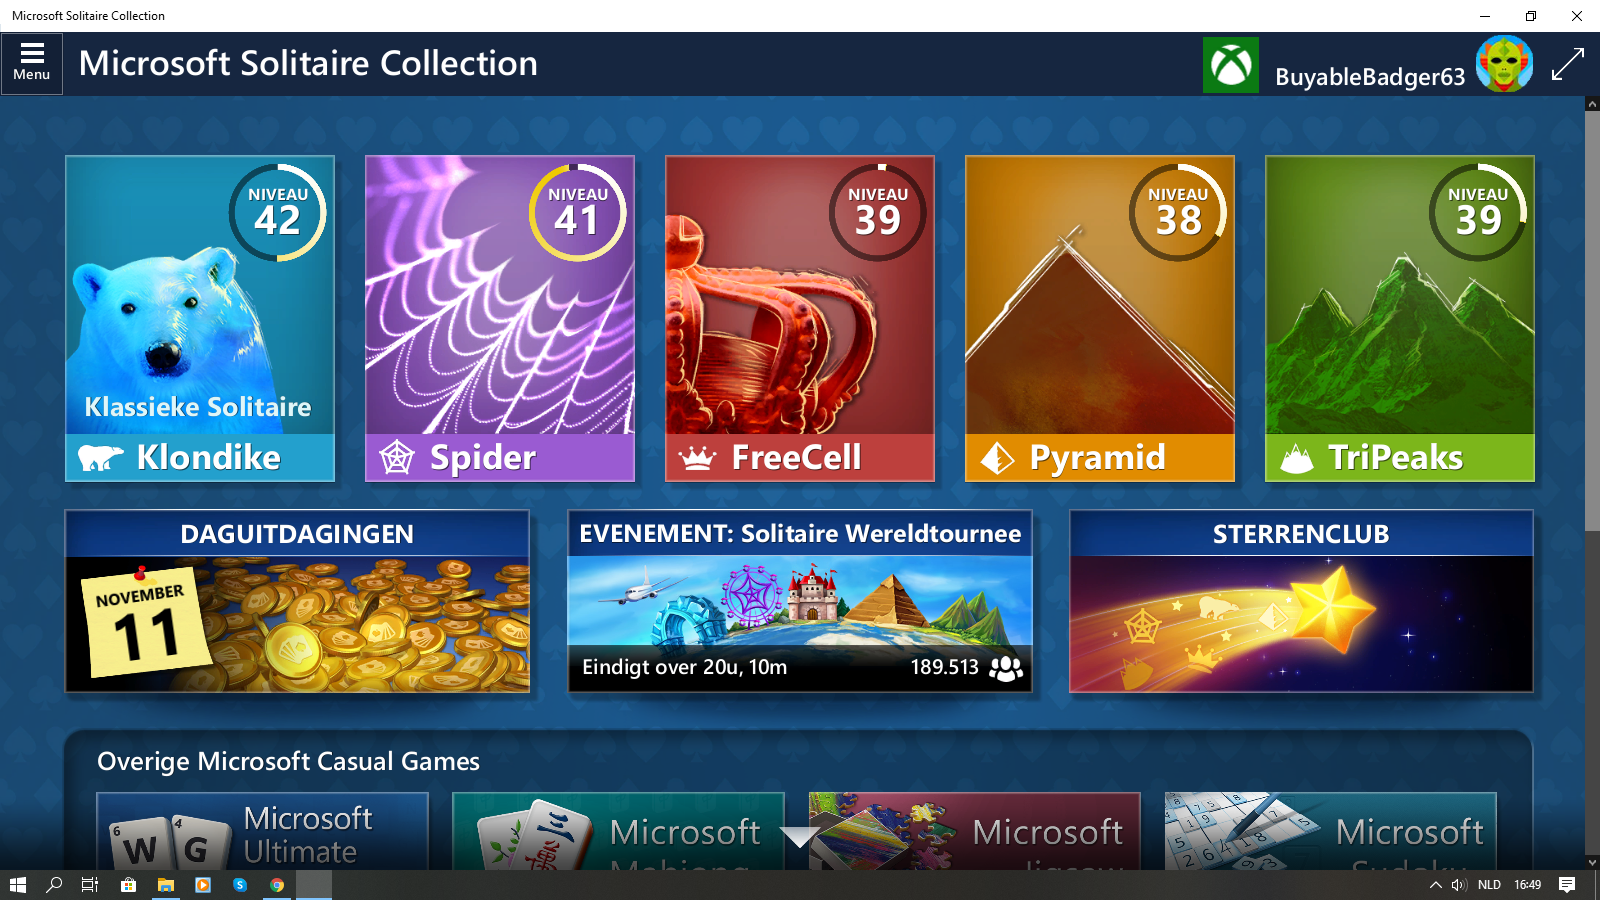 Windows 10 solitaire collection. Microsoft Solitaire collection. Microsoft Solitaire collection уровни. Microsoft Solitaire collection ежедневные задания. Windows collection.